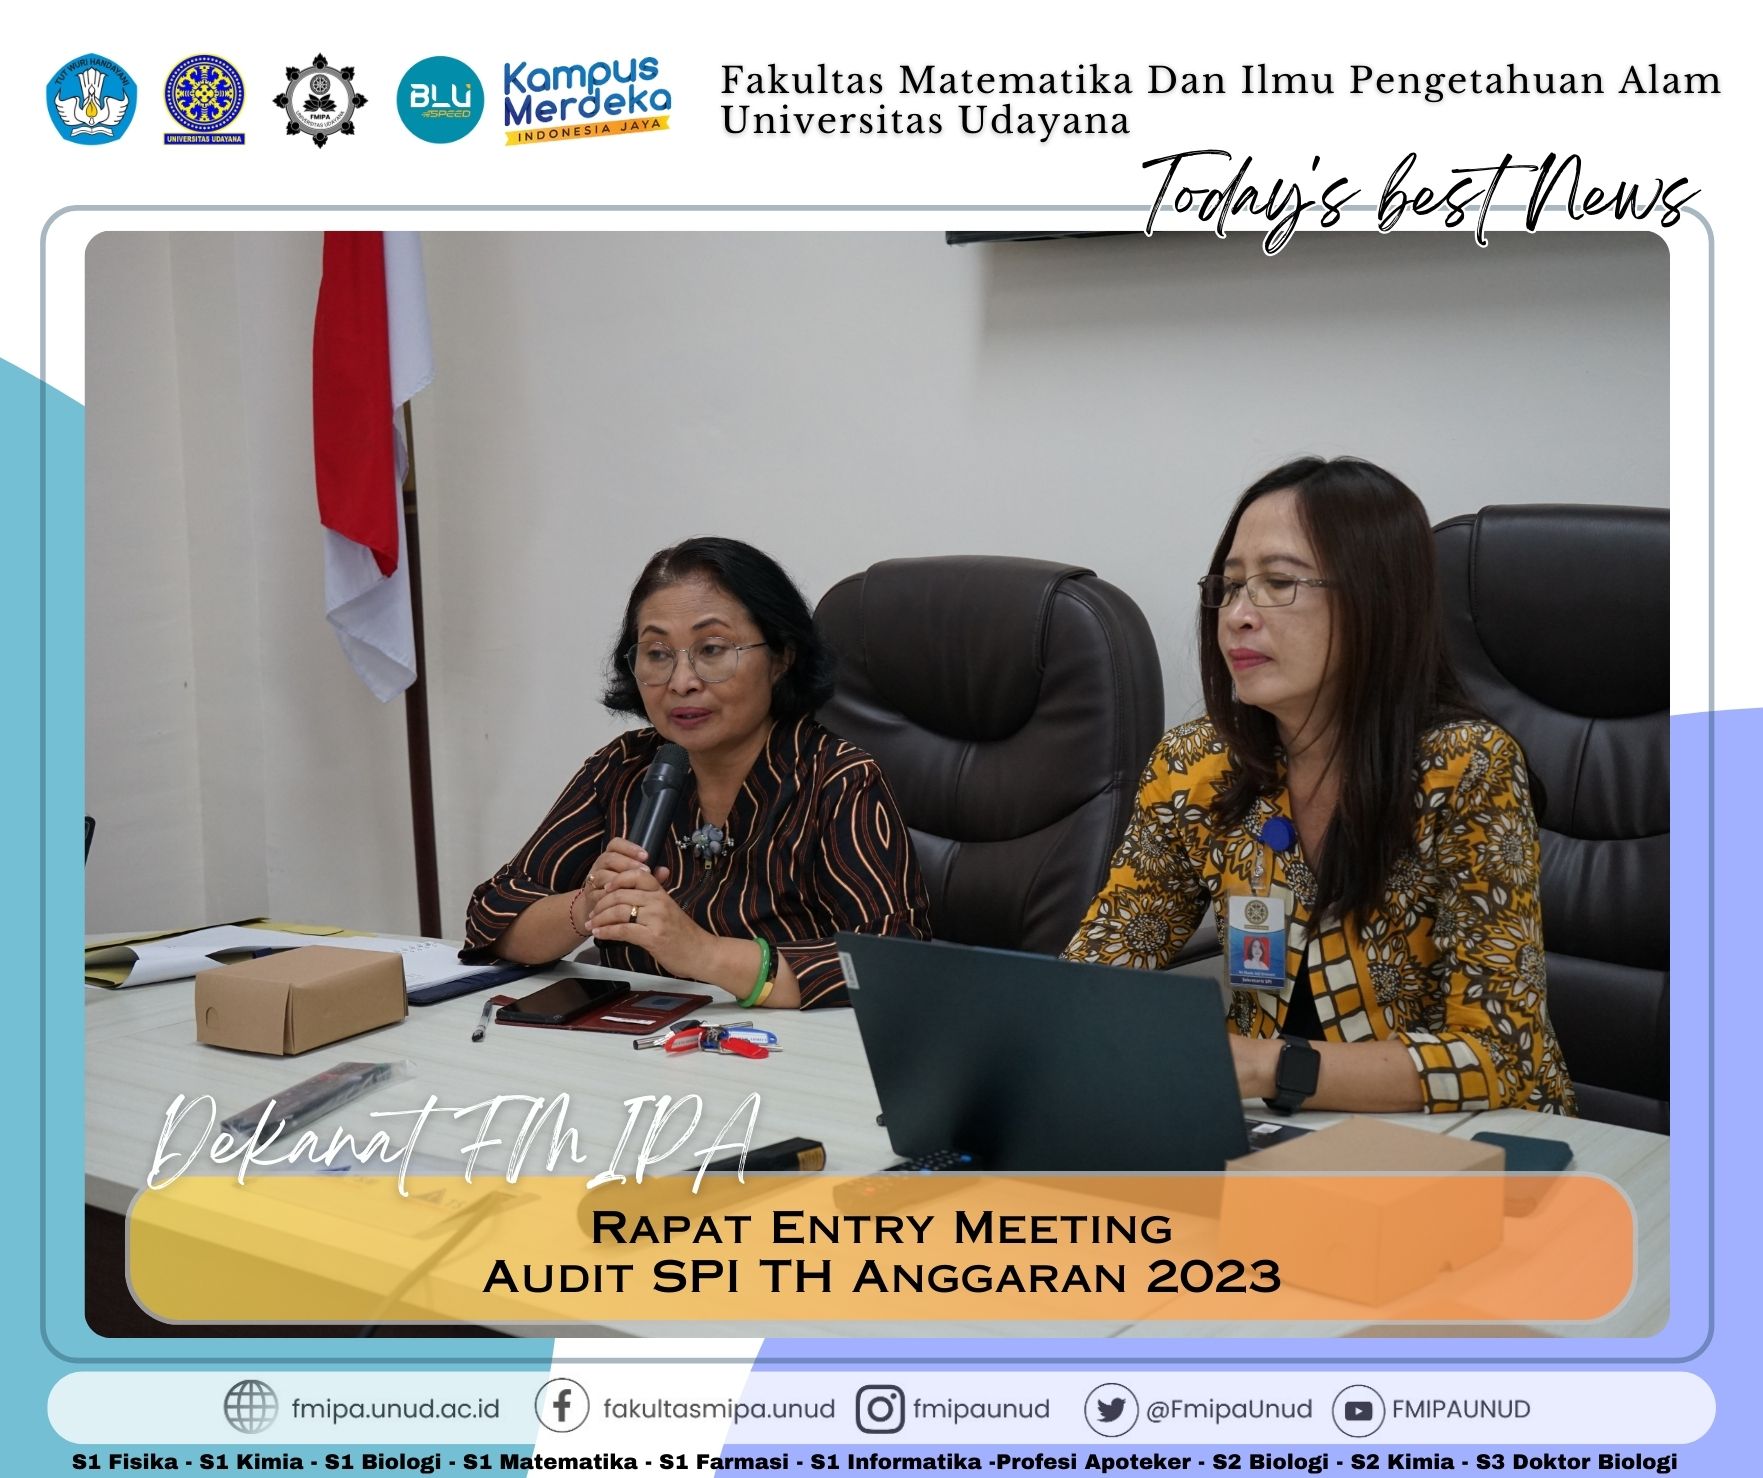 SPI Audit Entry Meeting at Faculty of Mathematics and Natural Sciences, Udayana University: A Step Towards Accountability and Integrity